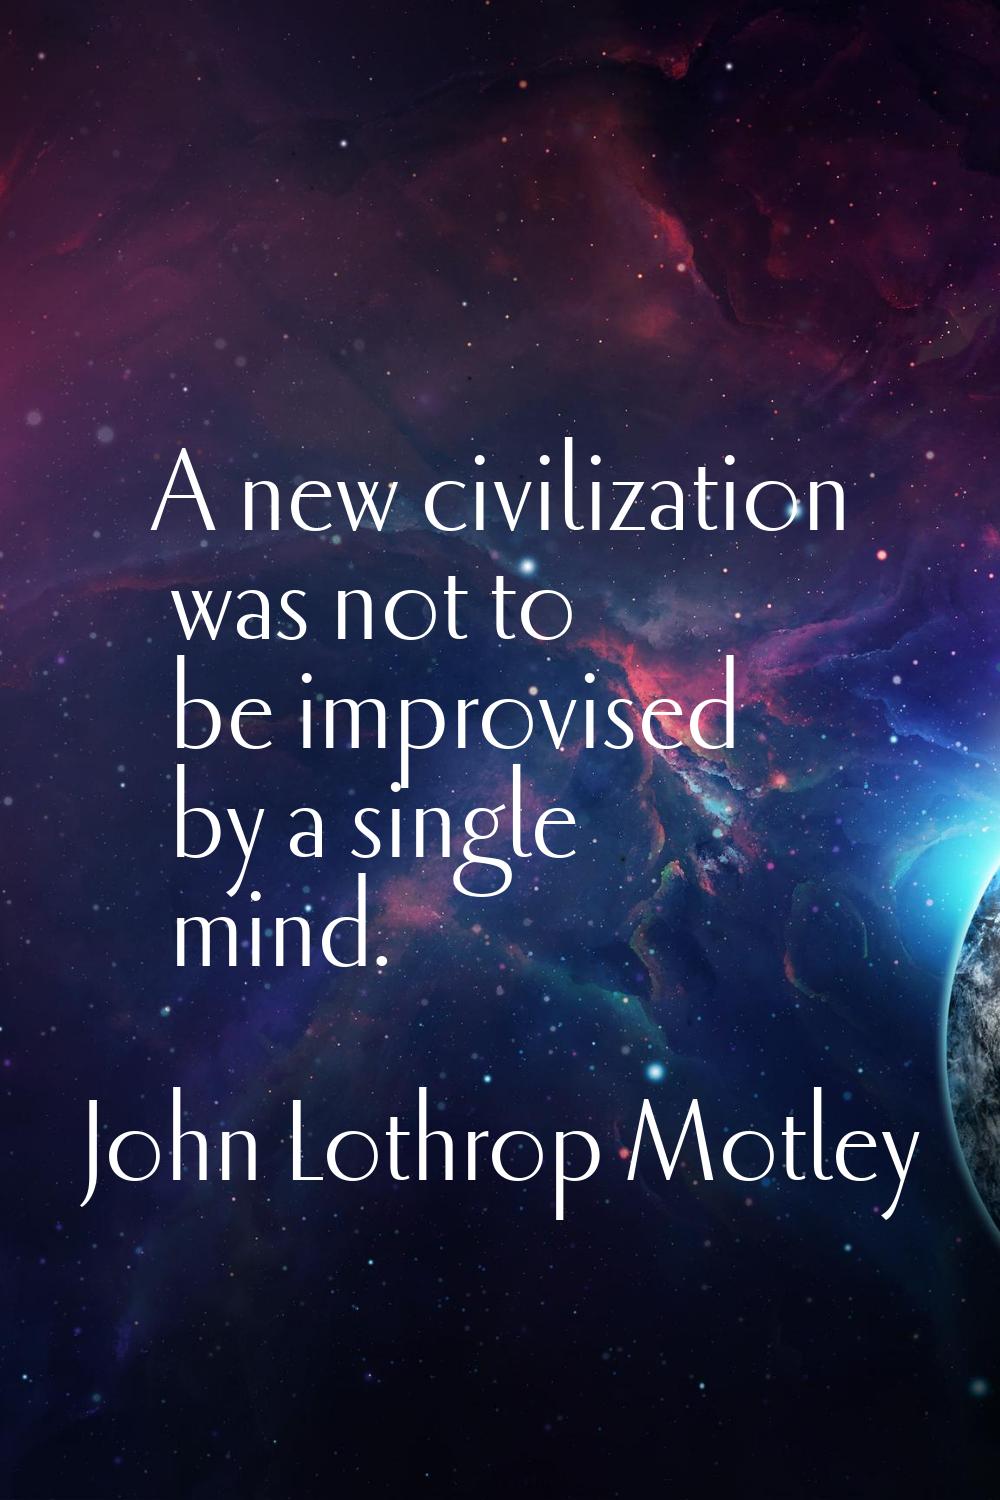 A new civilization was not to be improvised by a single mind.